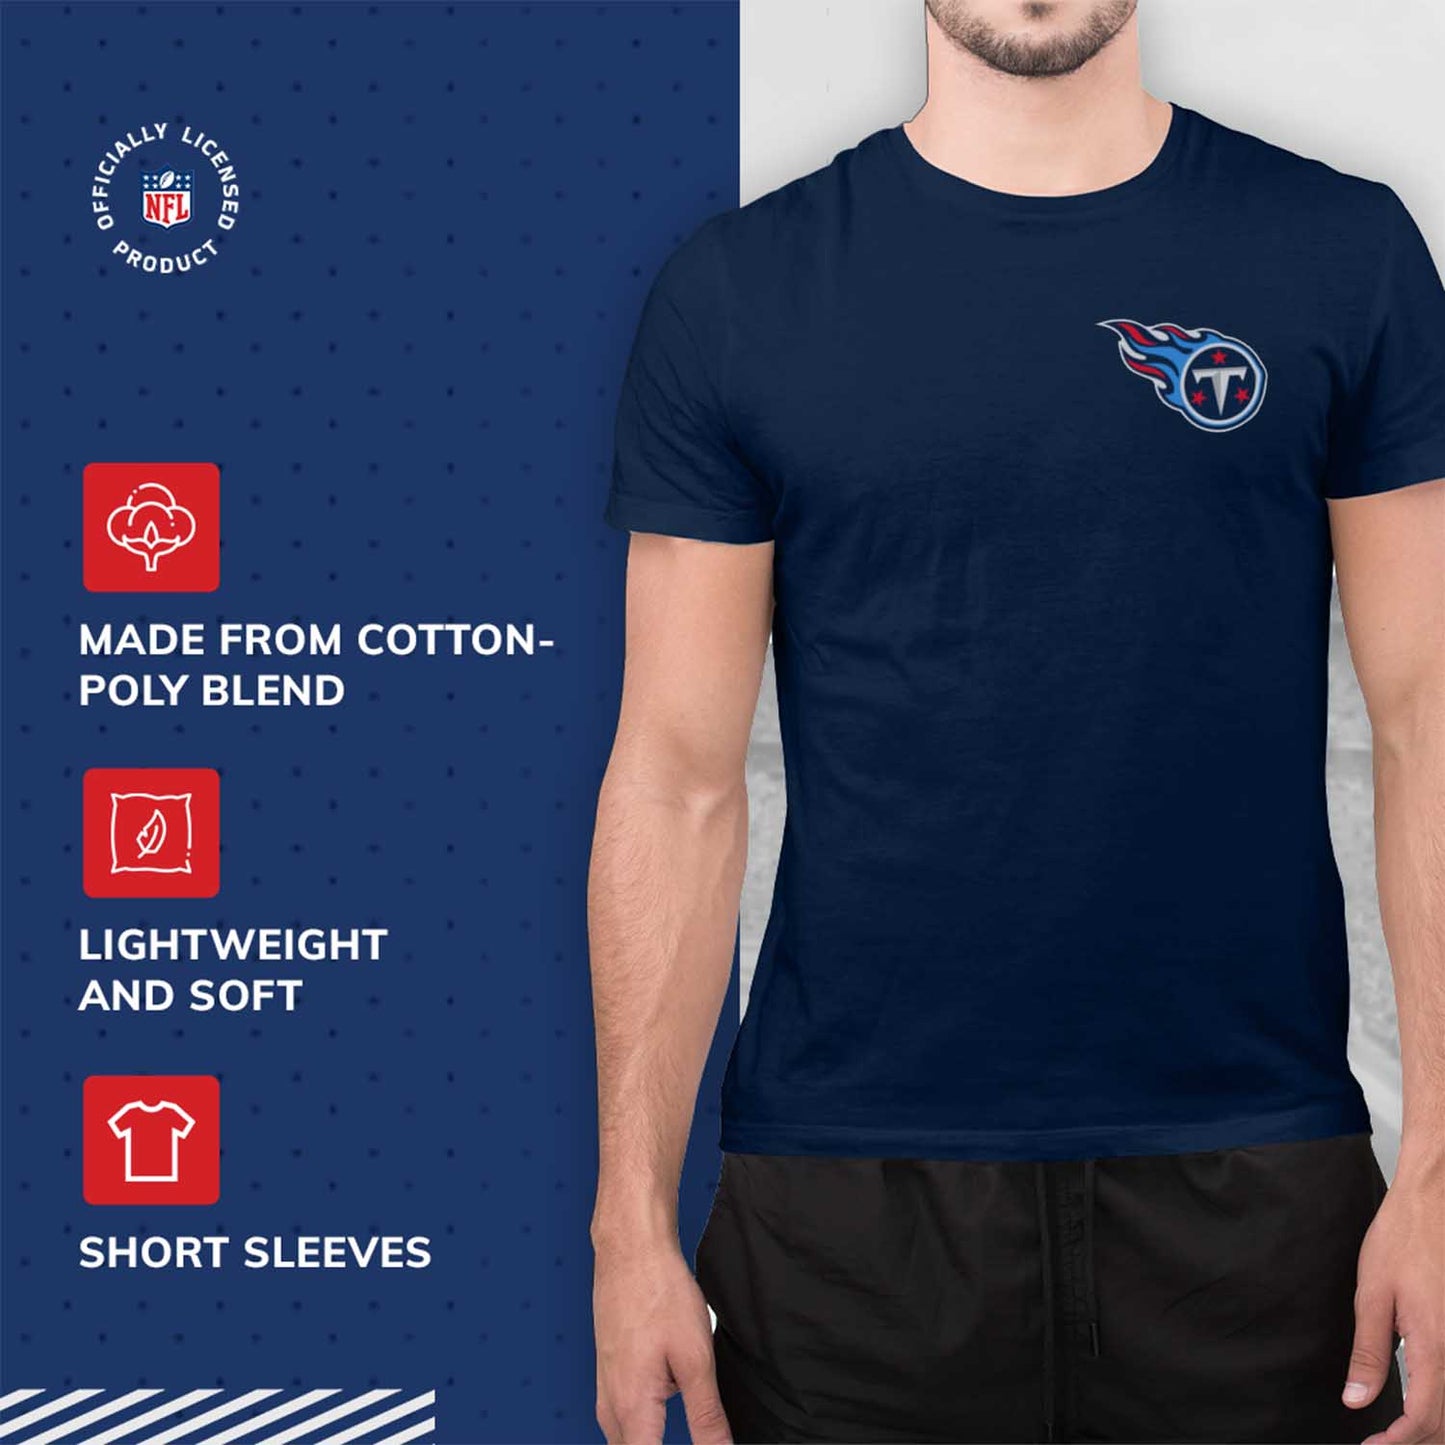 Tennessee Titans NFL Pro Football Final Countdown Adult Cotton-Poly Short Sleeved T-Shirt For Men & Women - Navy